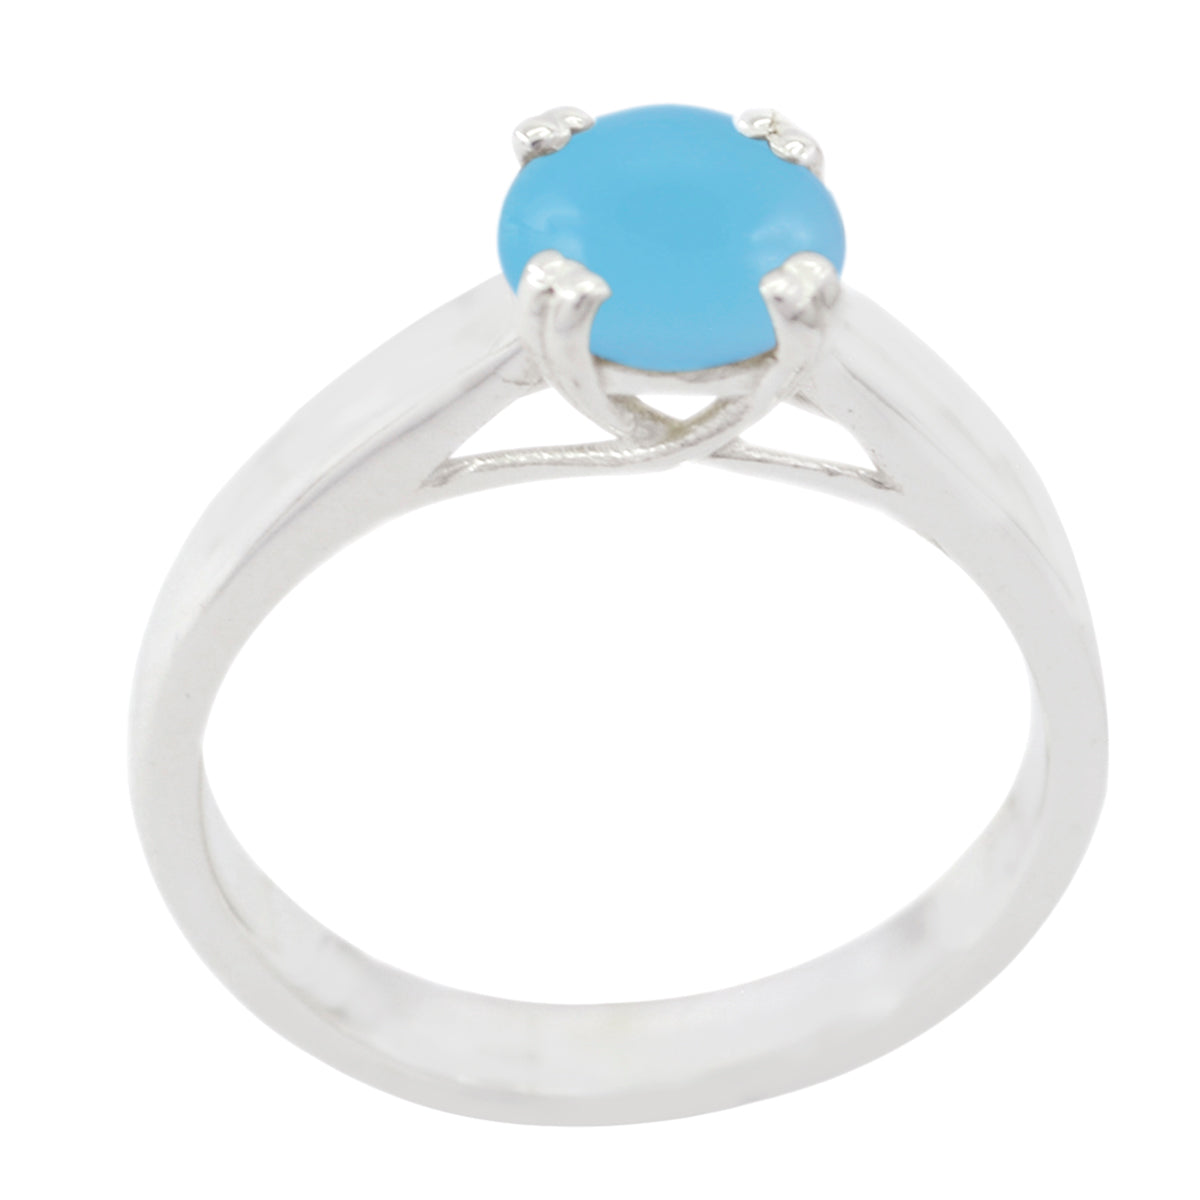 Presentable Gem Chalcedony Solid Silver Ring Personalized Jewellery